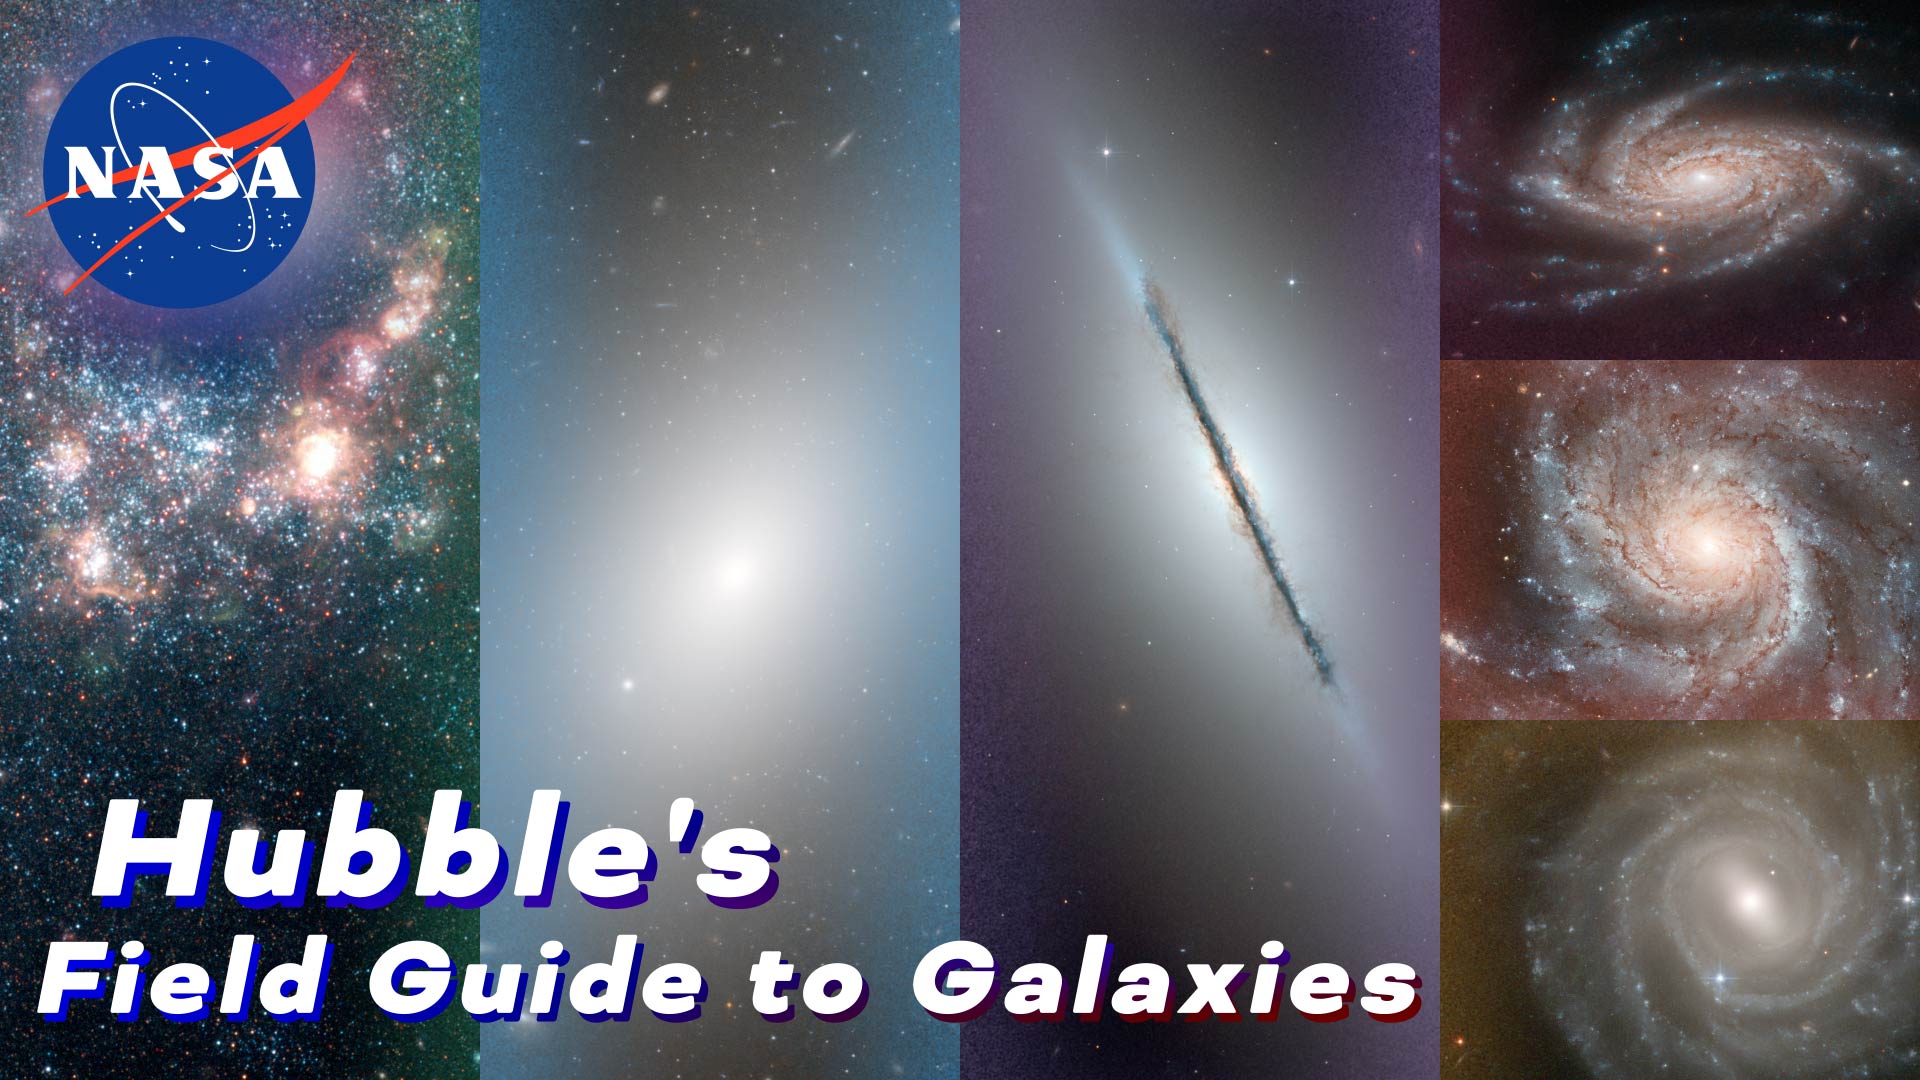 Preview Image for Hubble's Field Guide to Galaxies